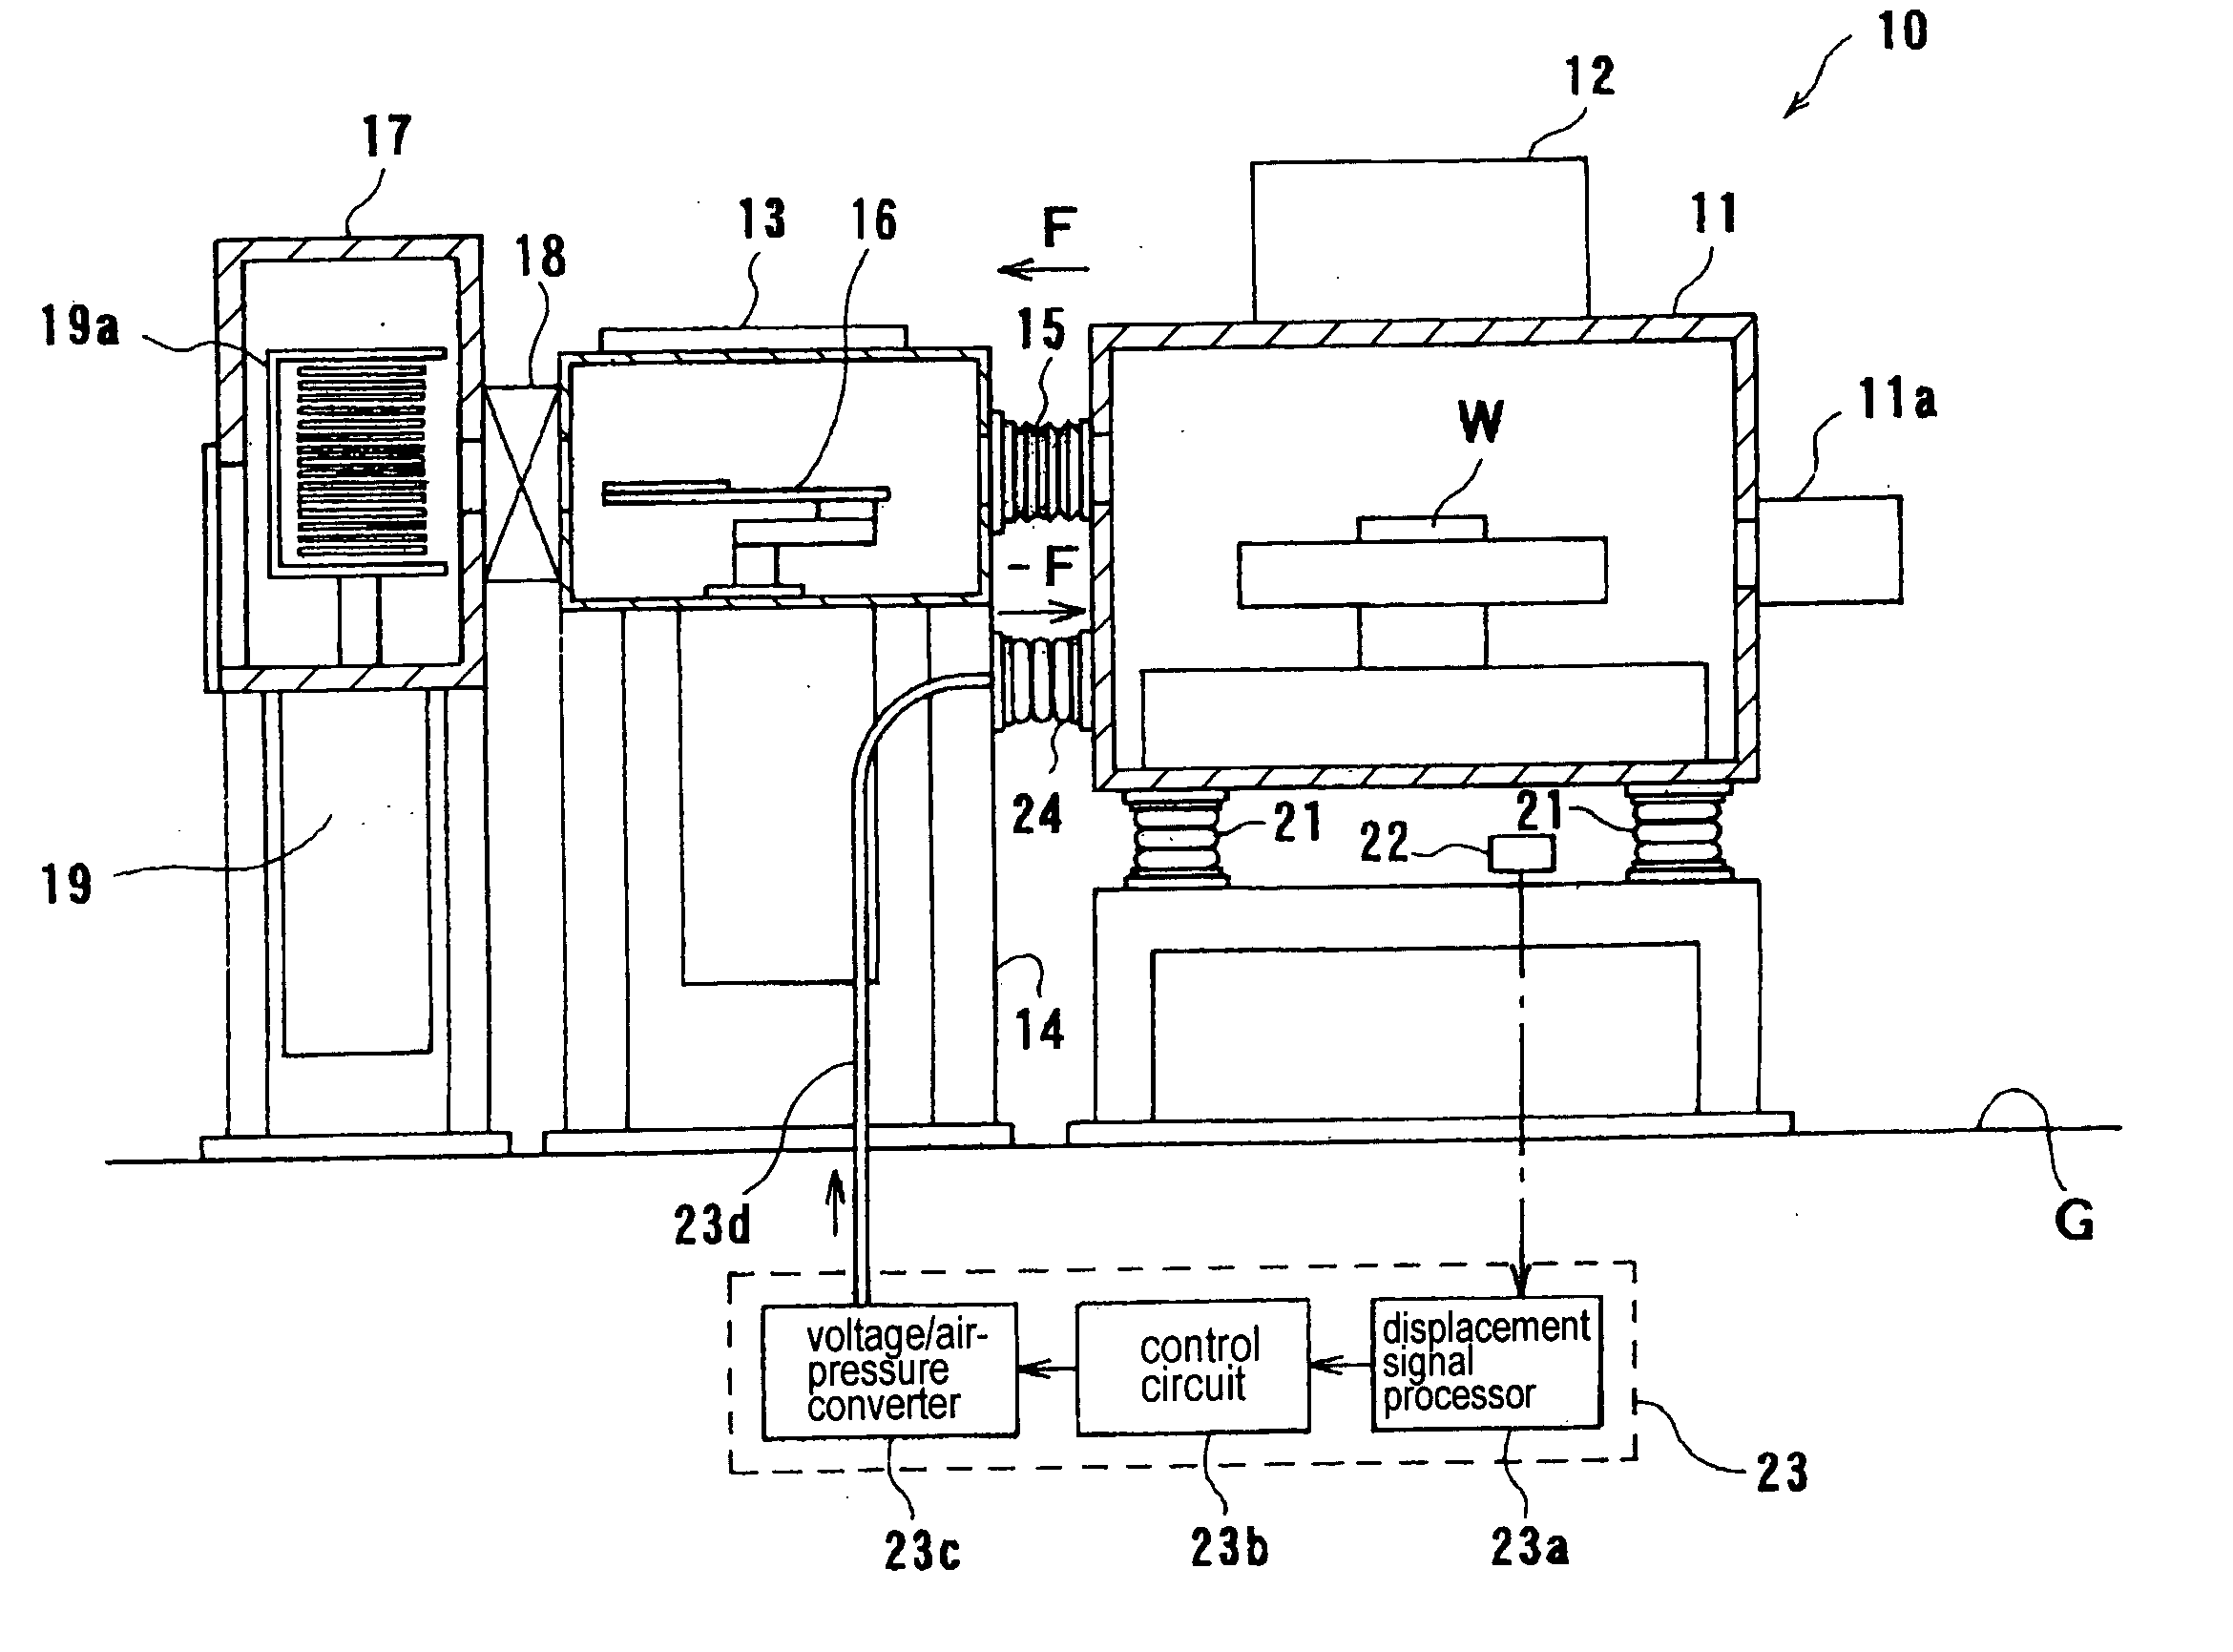 Vibration isolation system for a vacuum chamber